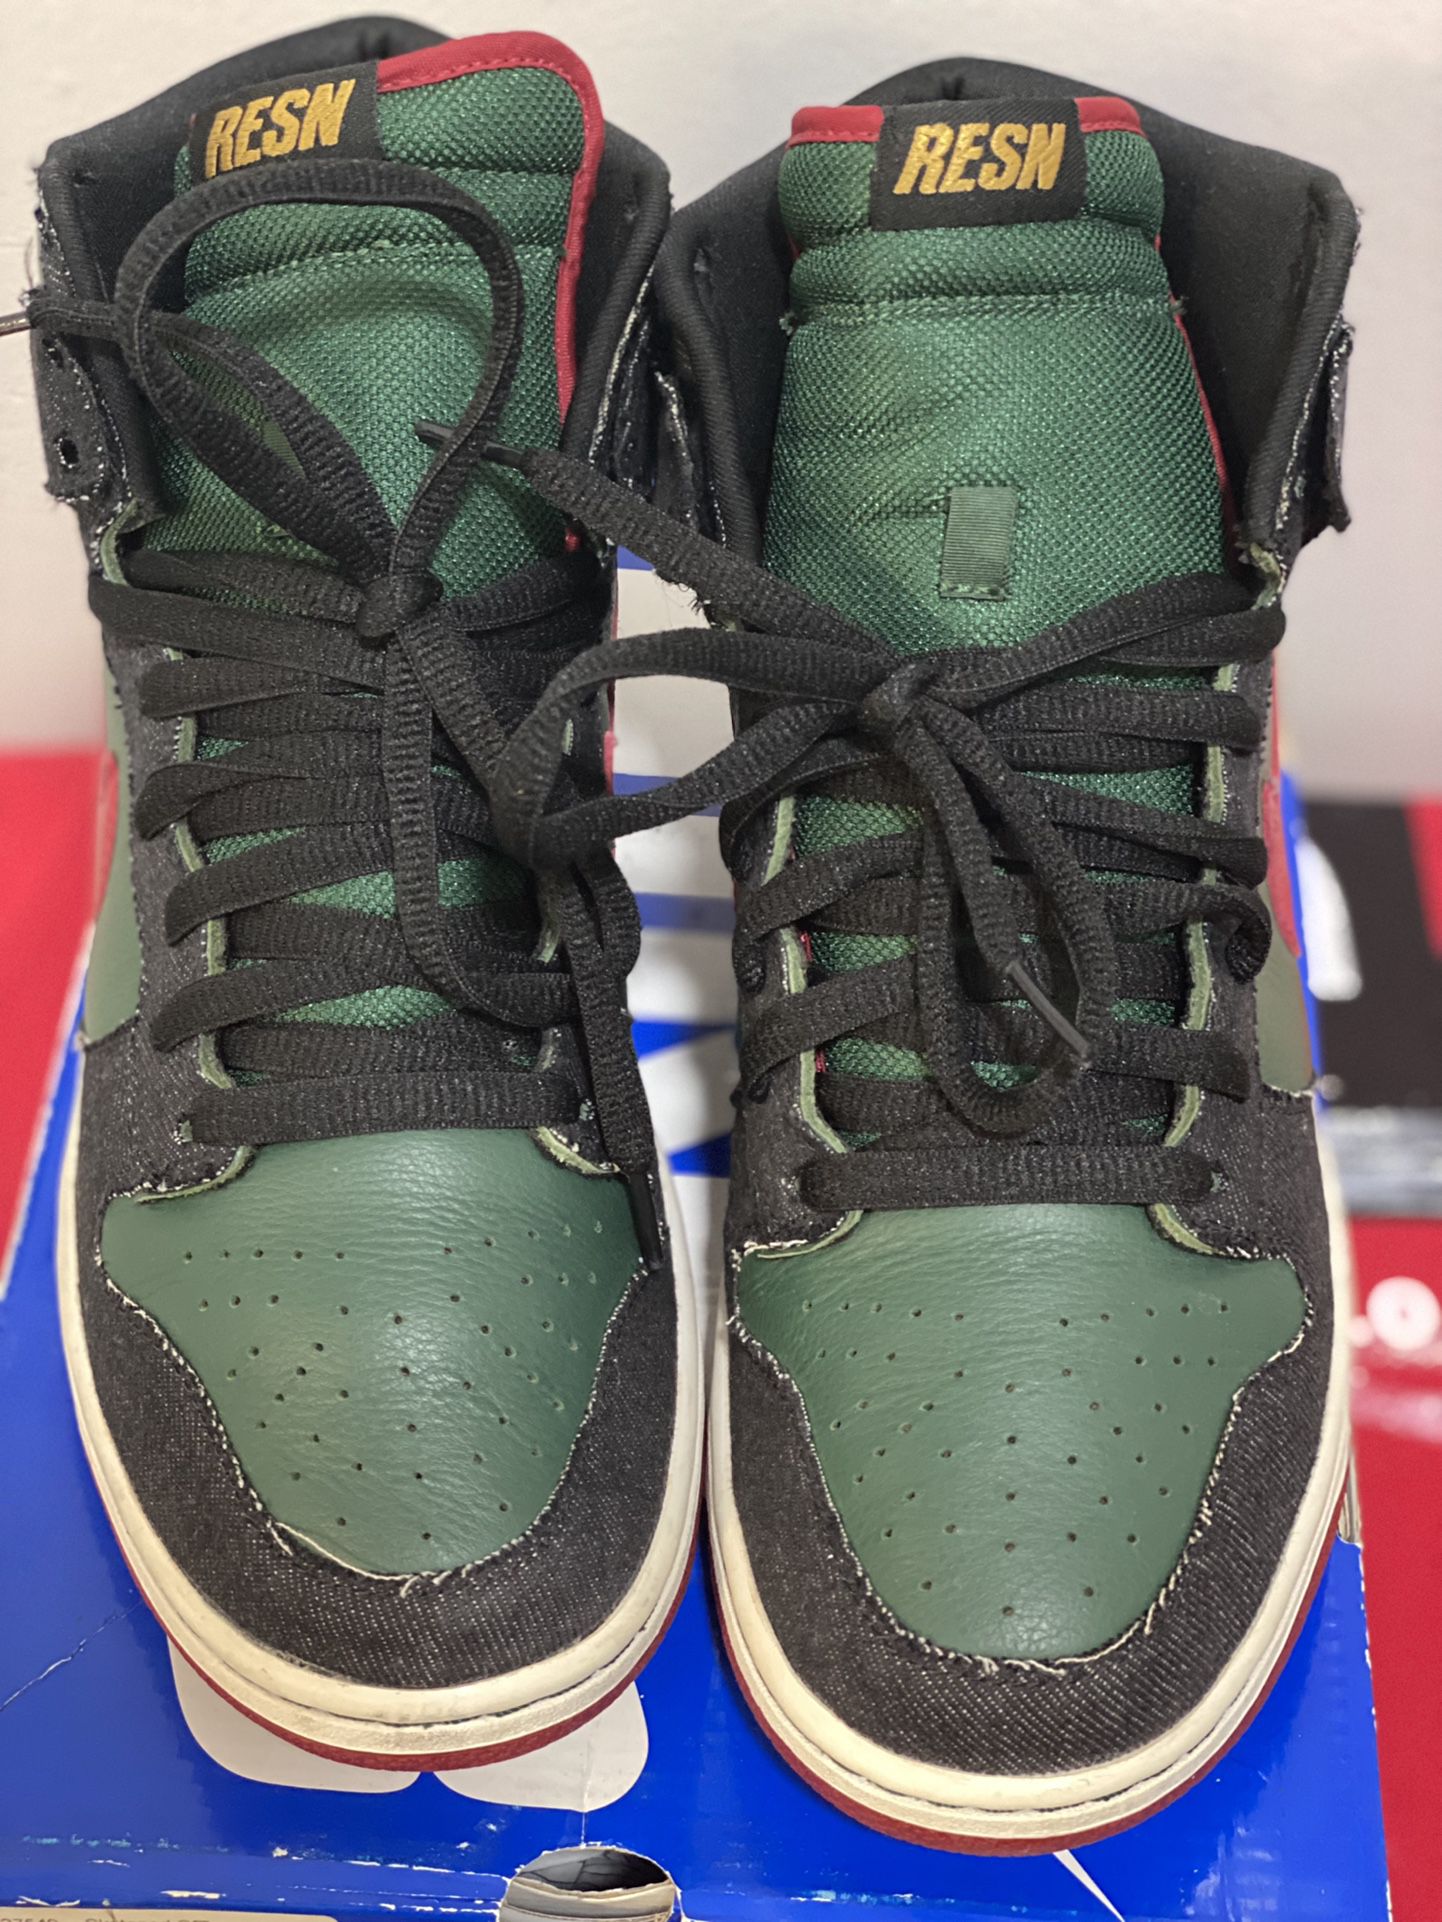 Nike Dunk Sb High “Gucci/RESN” Sz 10.5 Obo NO TRADES! for Sale in Newport News, VA - OfferUp